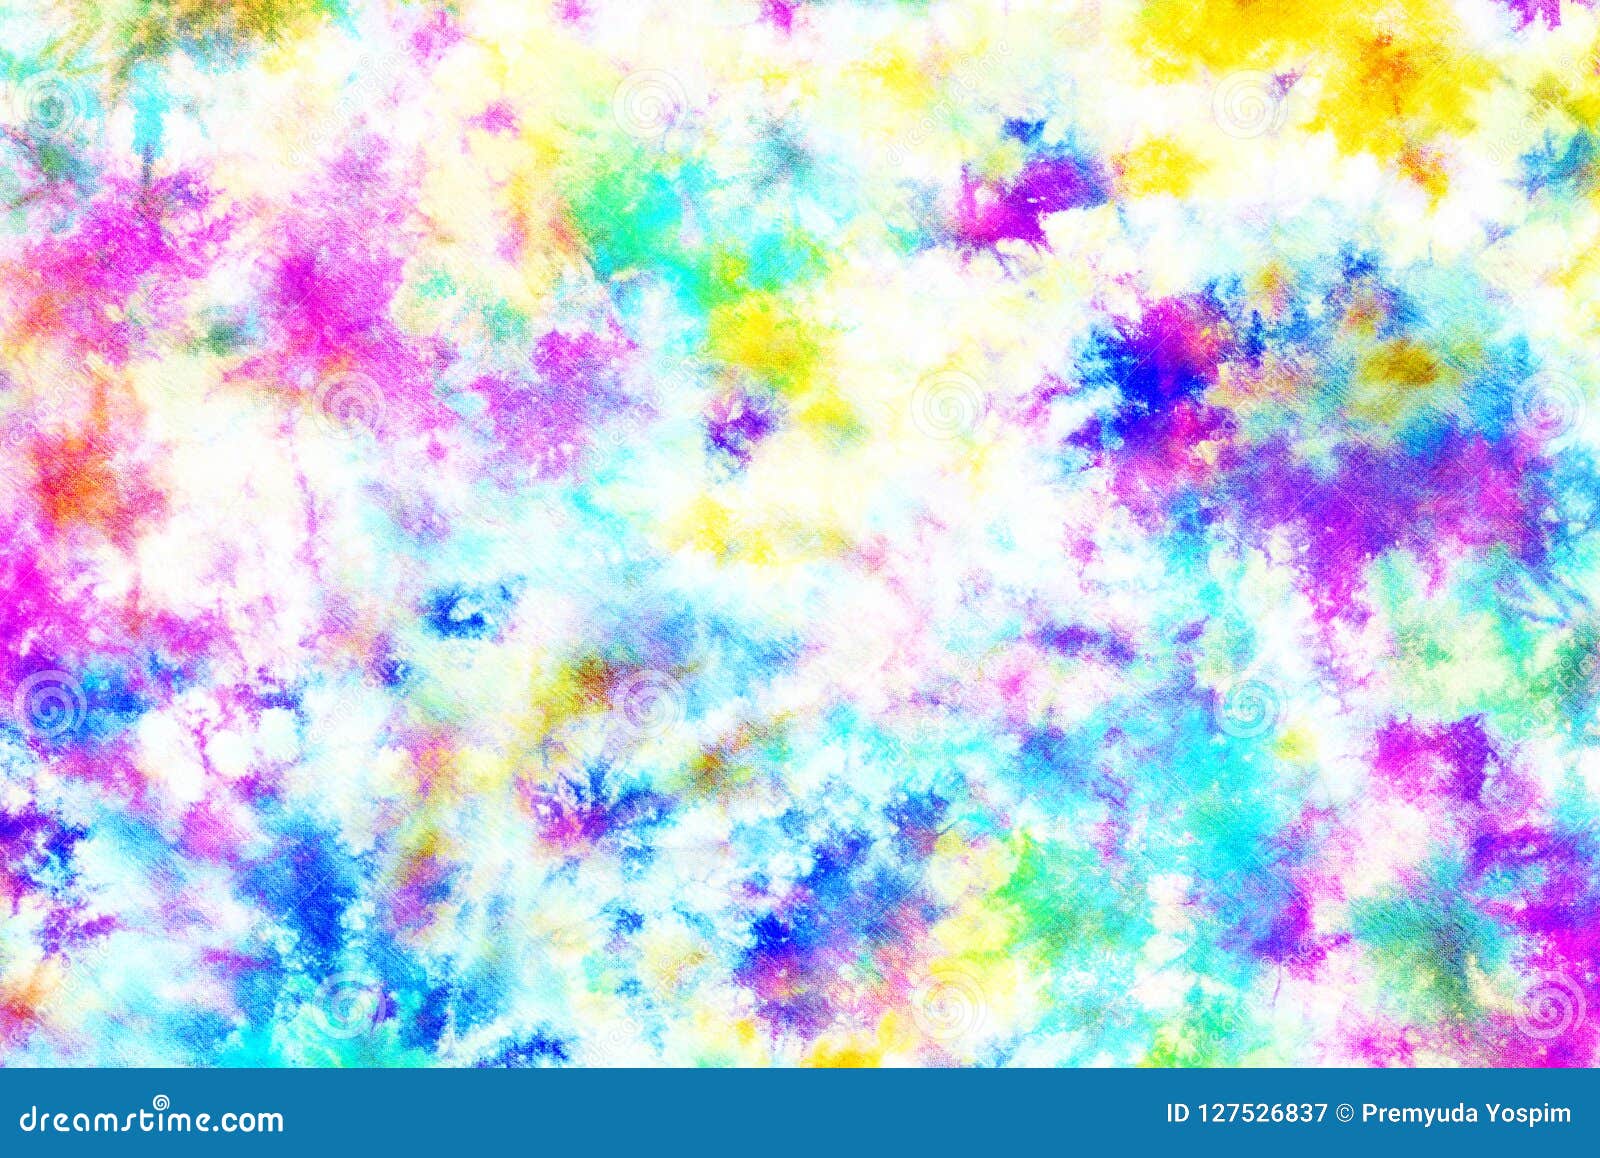 Tie Dye Pattern Abstract Background Stock Photo - Download Image